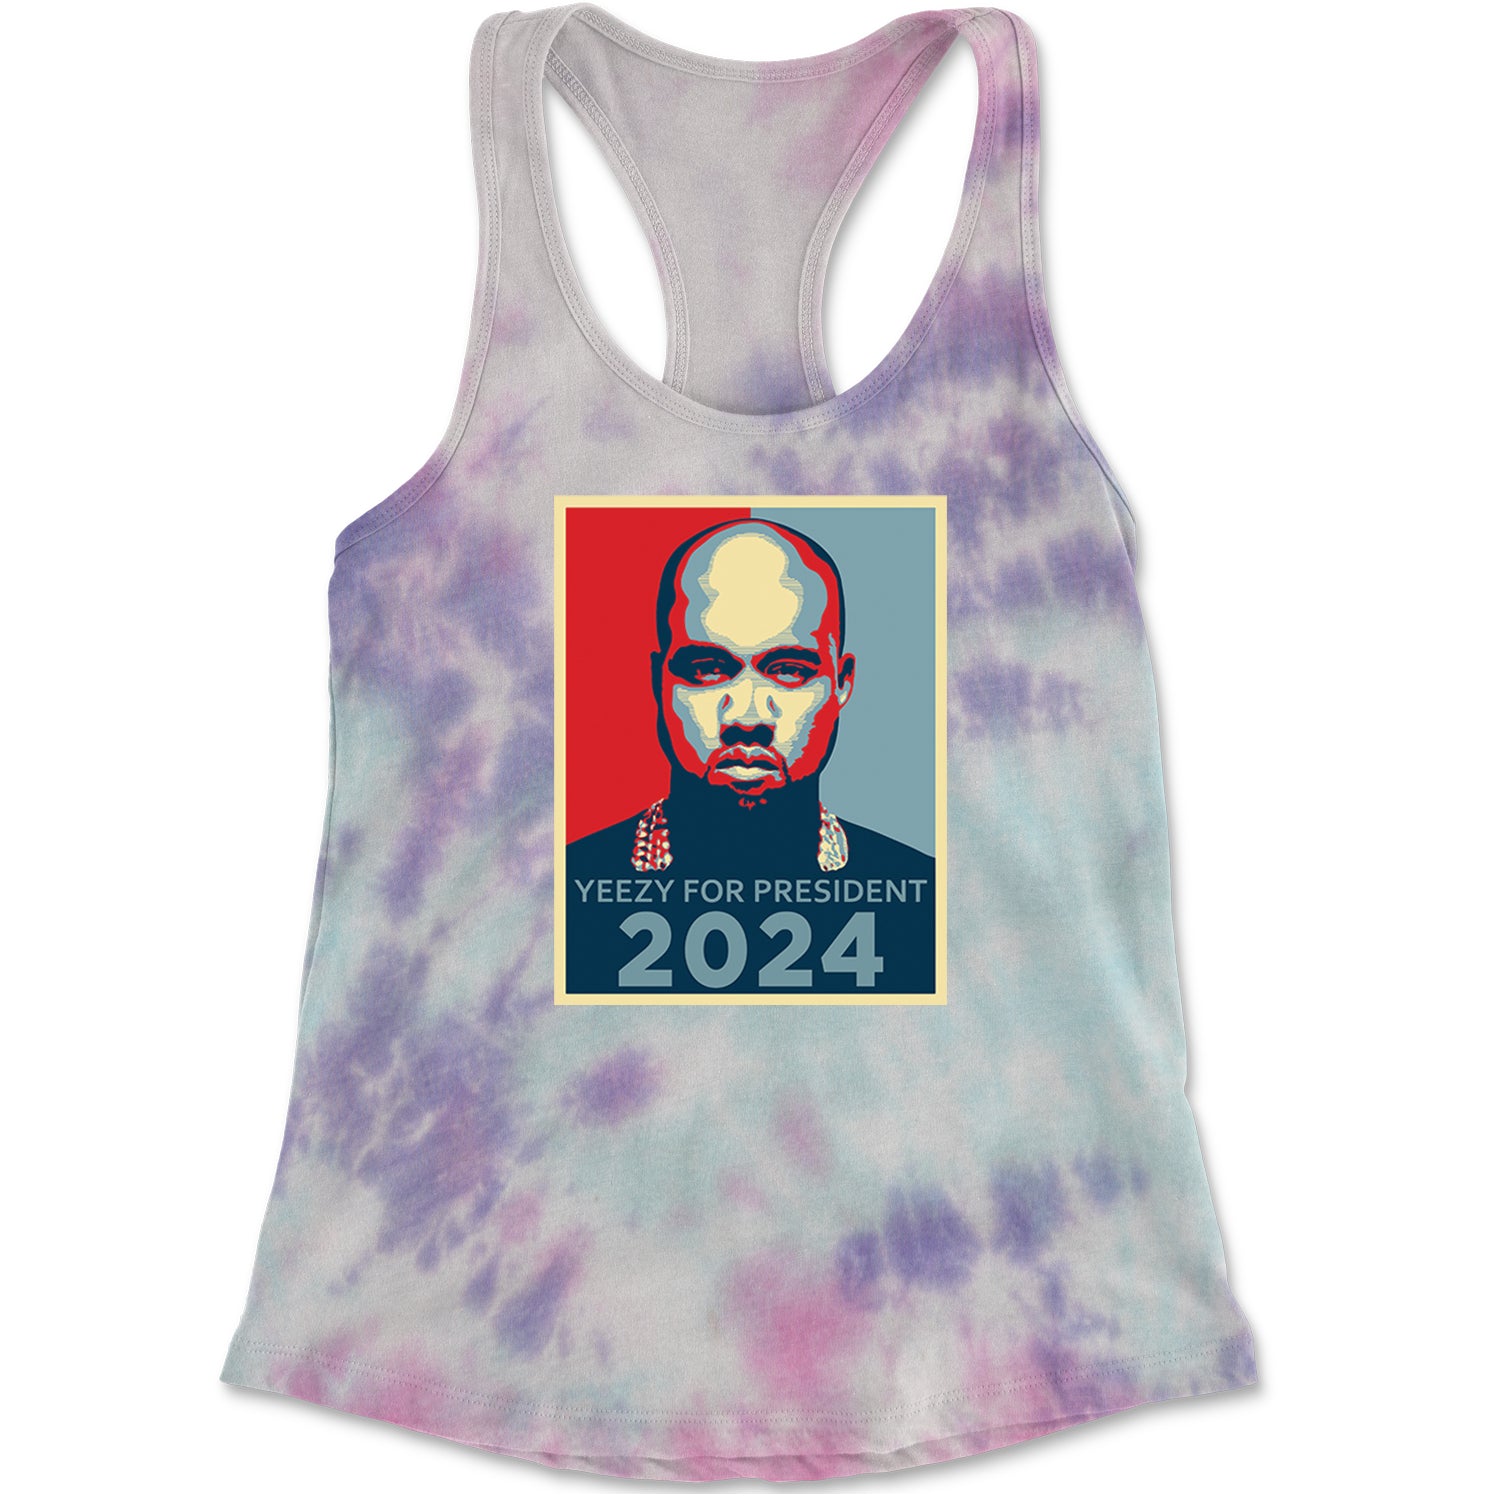 Yeezus For President Vote for Ye Racerback Tank Top for Women Cotton Candy